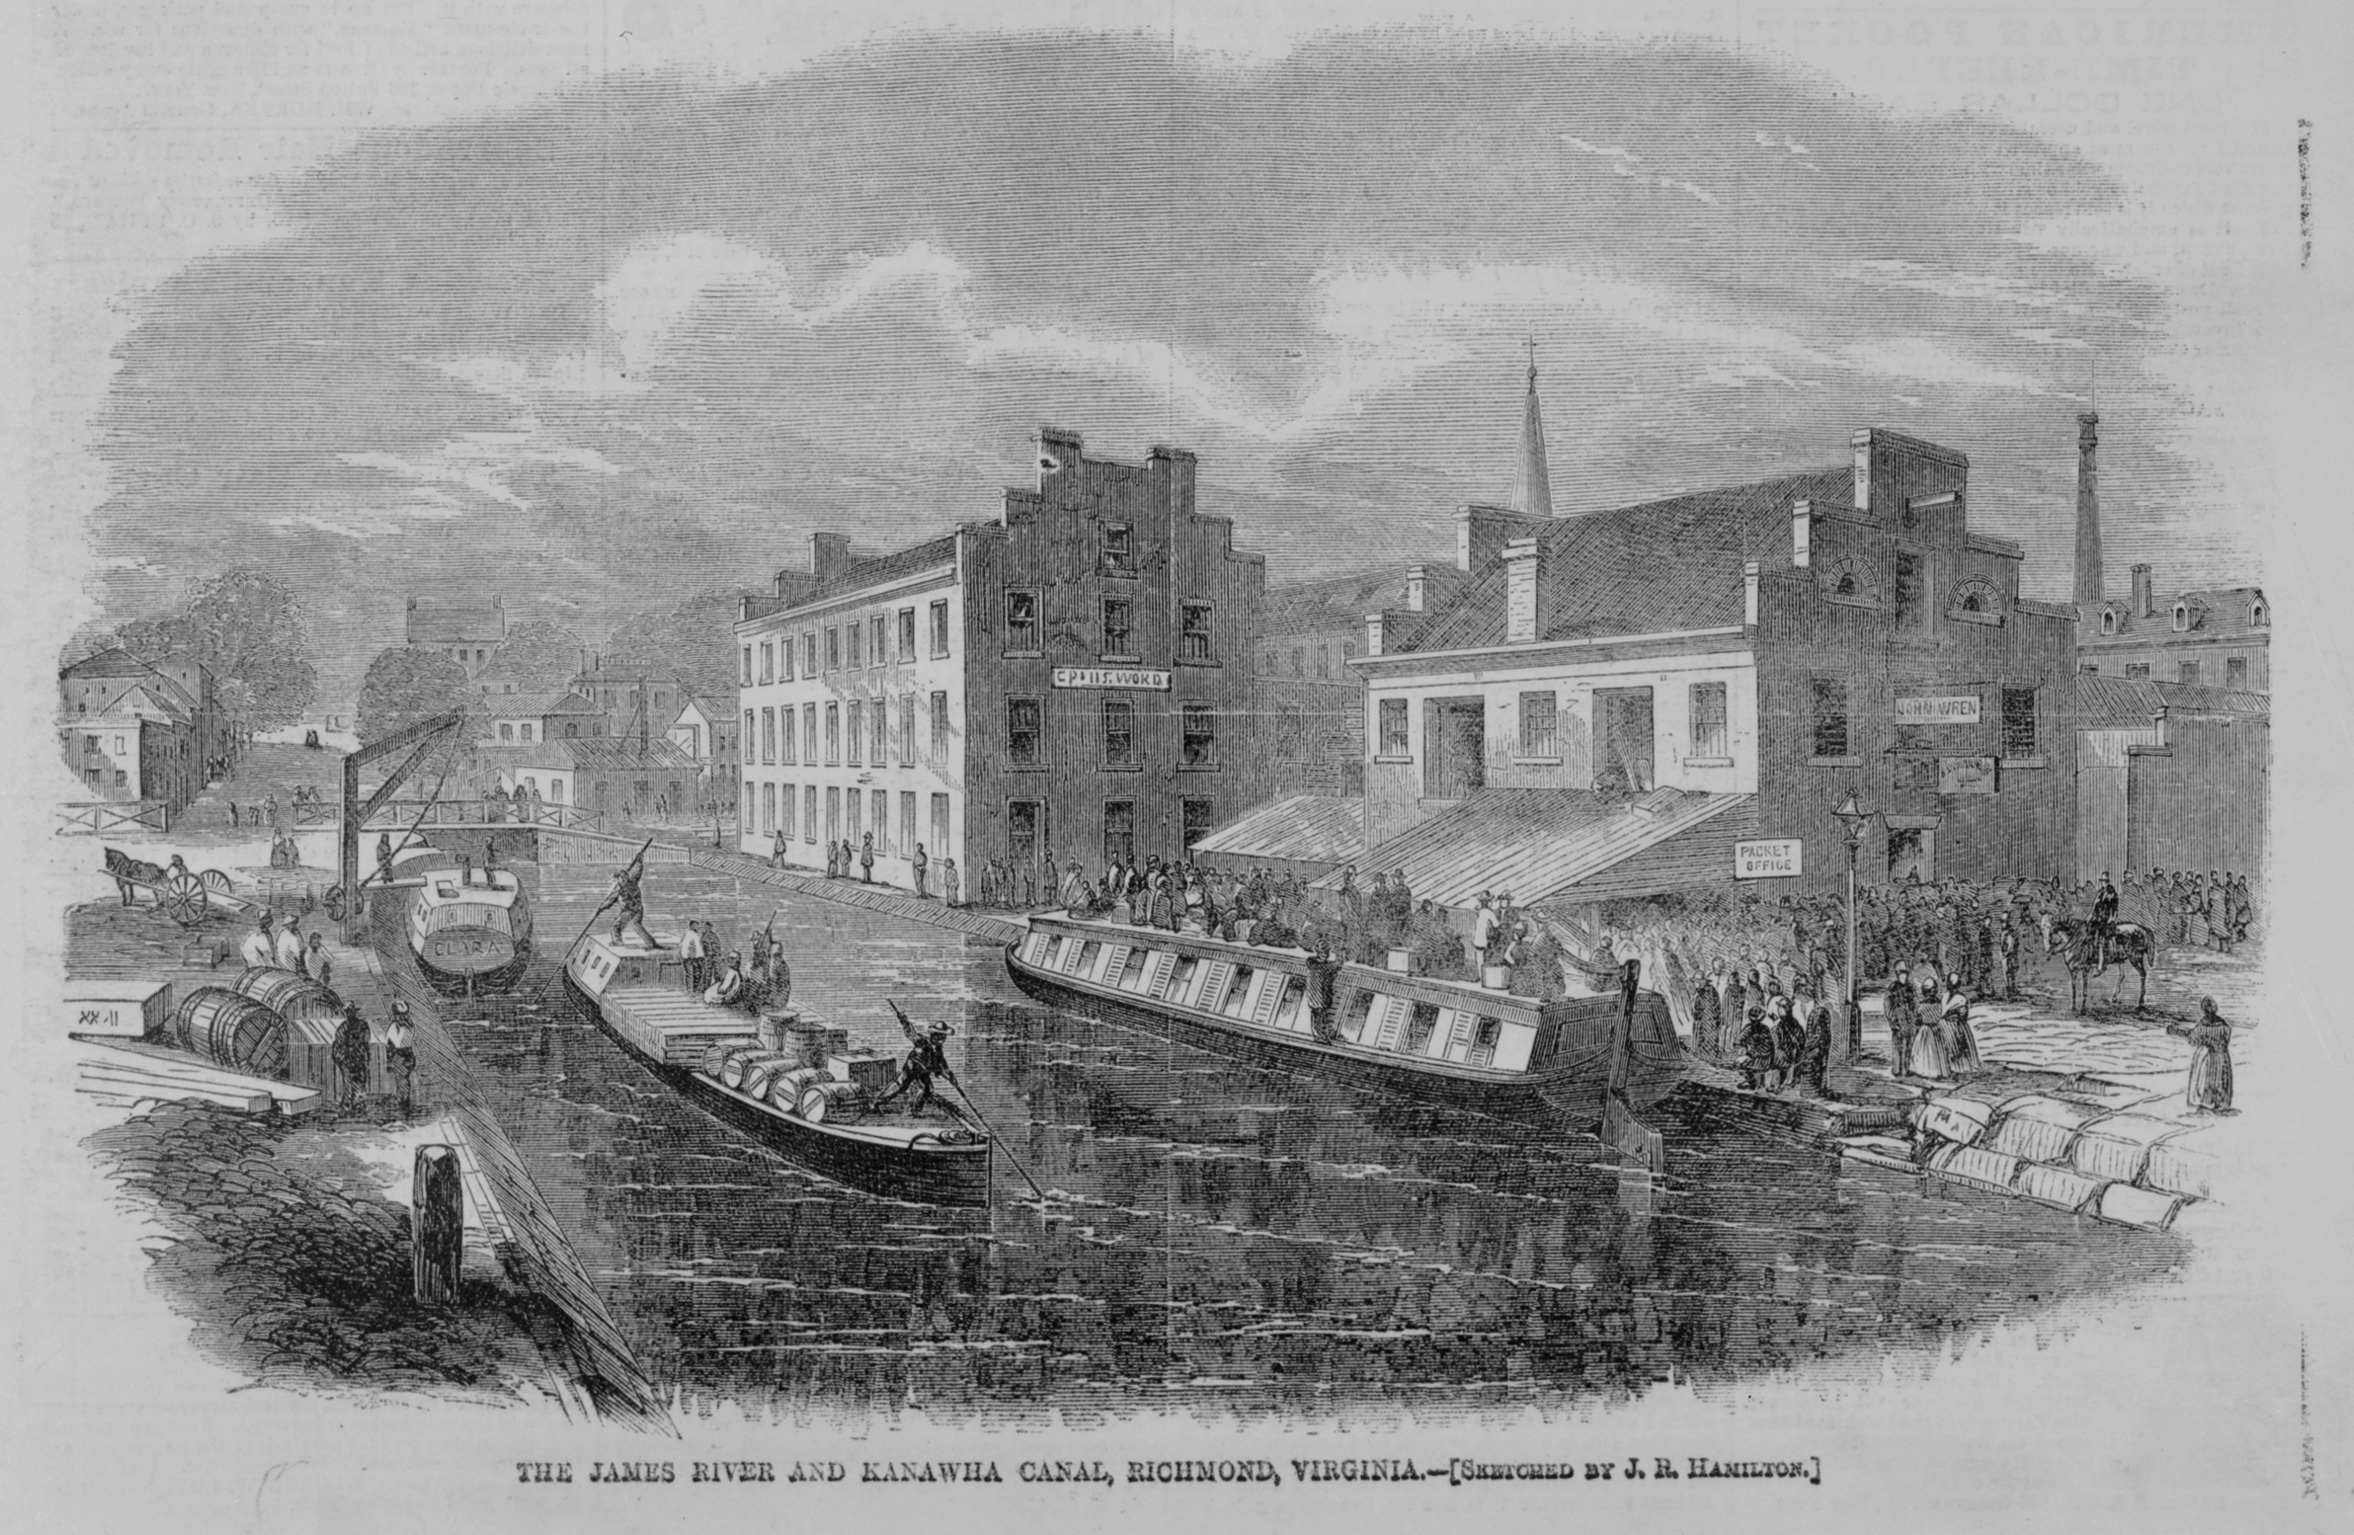 Sketch of passenger and cargo boats on the James River and Kanawha Canal in Richmond, VA